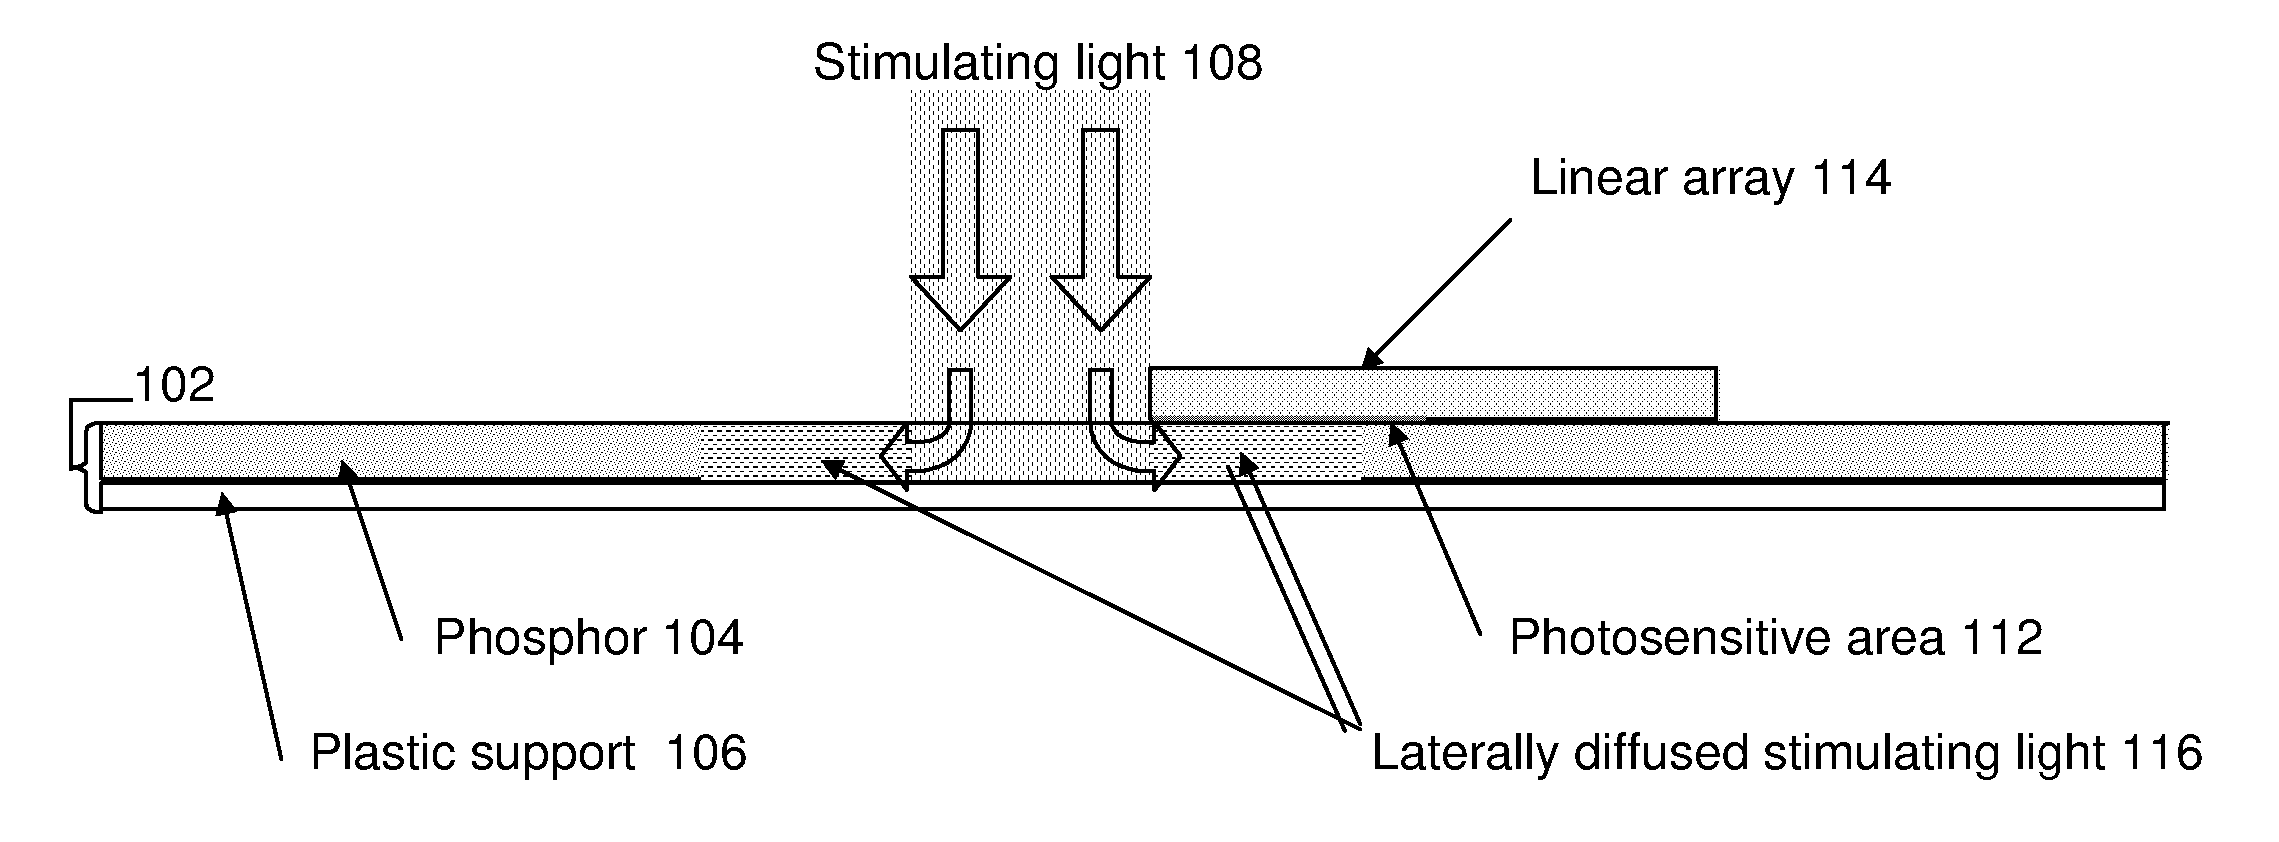 Light stimulating and collecting methods and apparatus for storage-phosphor image plates